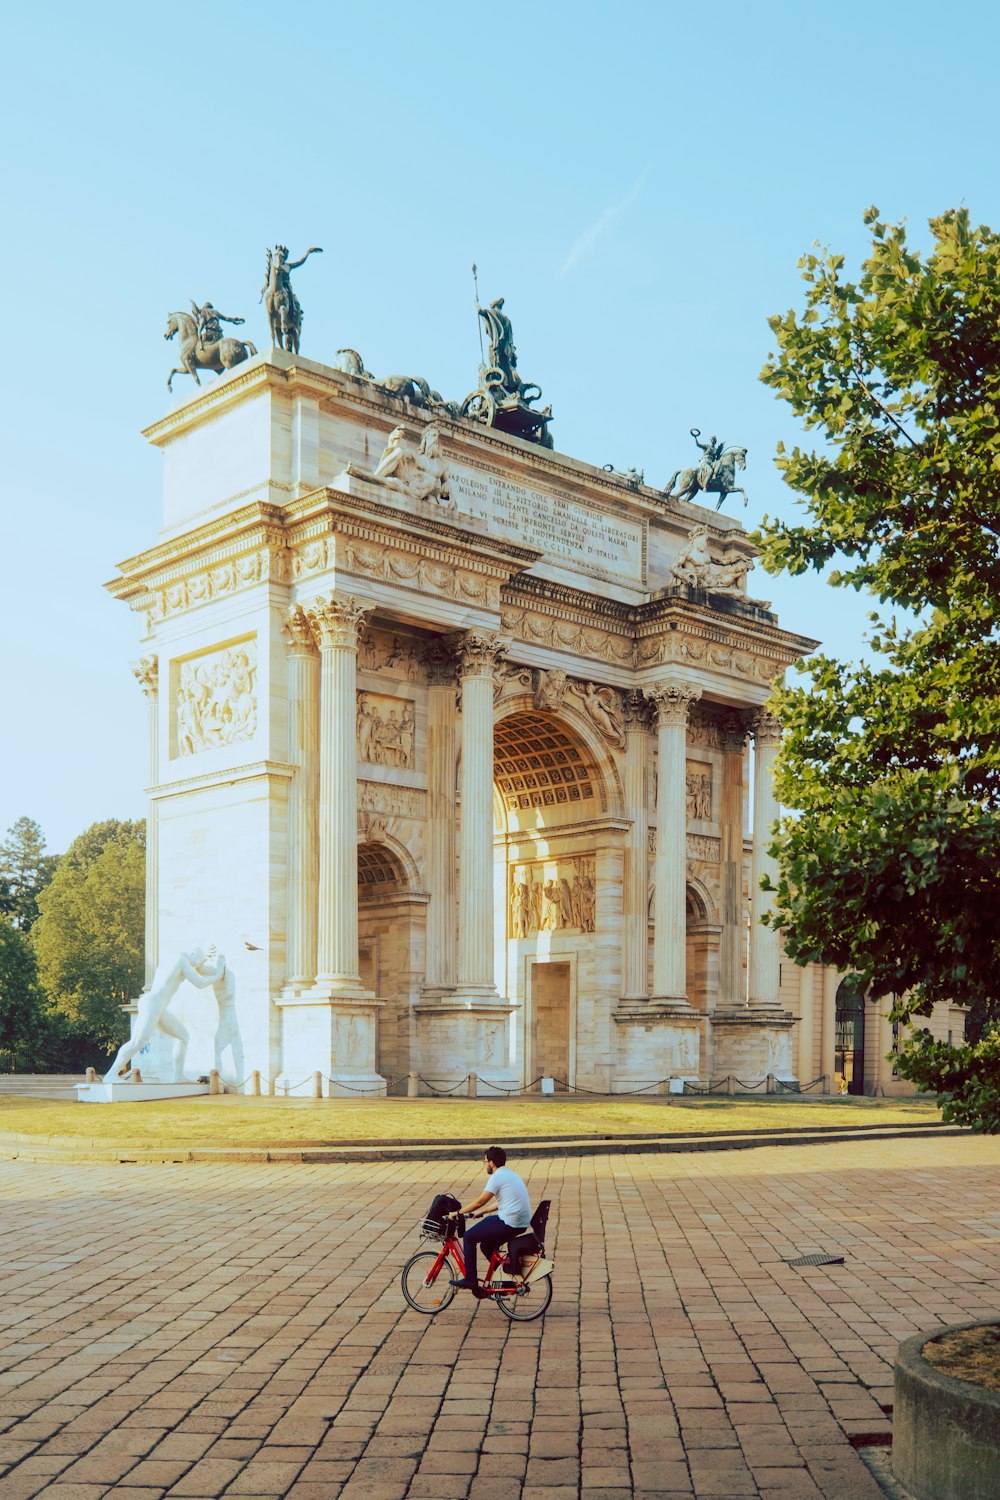 a person riding a bicycle in front of a building with statues